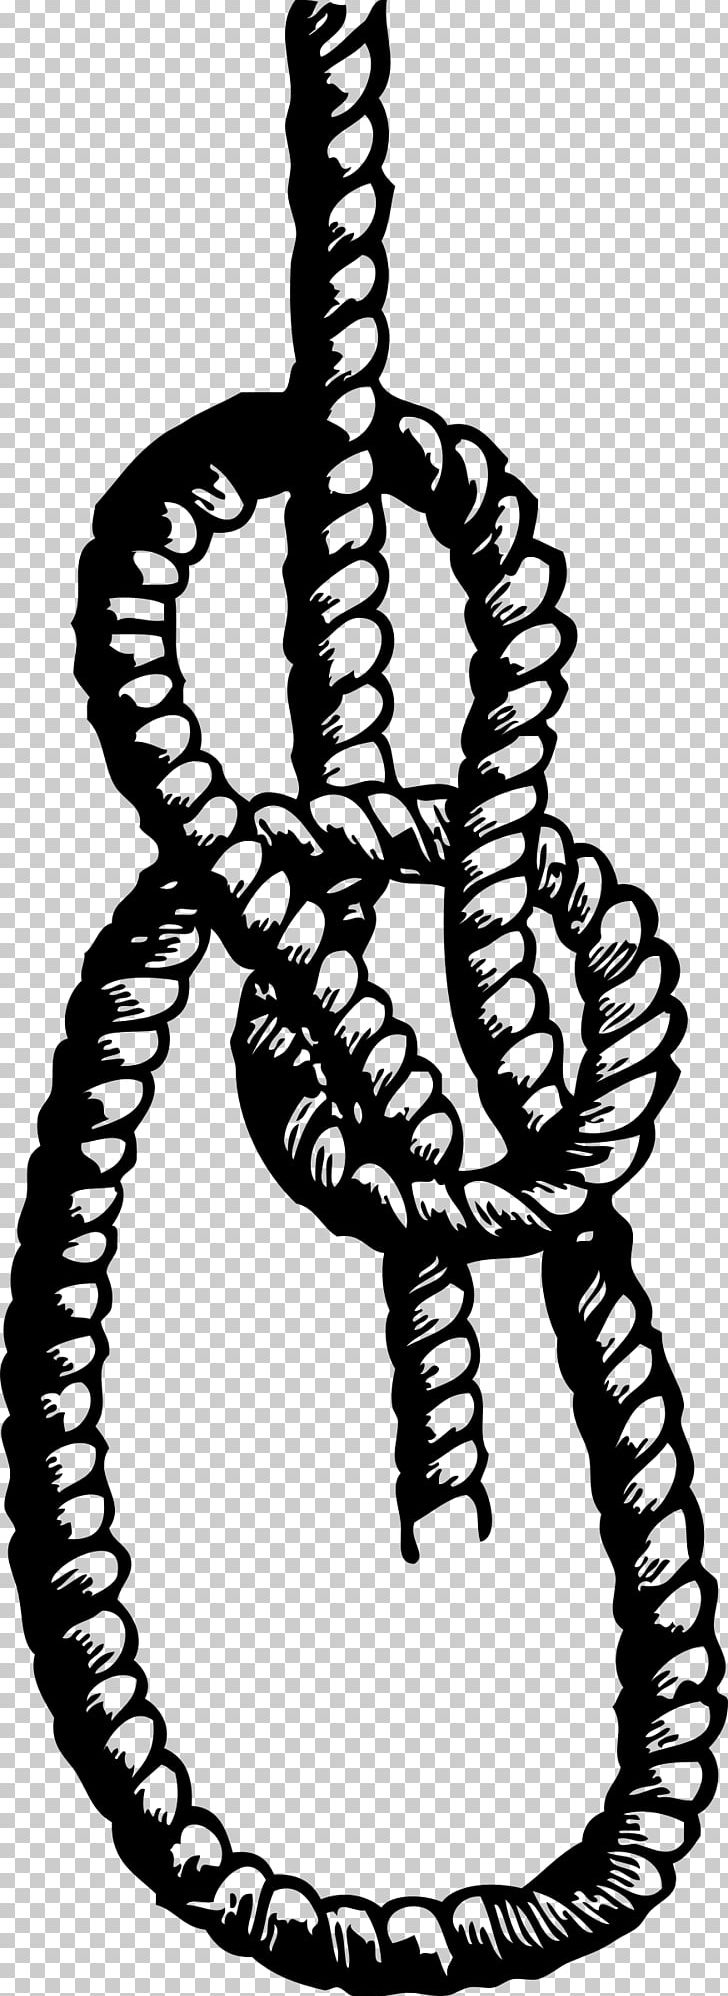 Seizing Knot PNG, Clipart, Bender, Black And White, Bowline, Bowline On A Bight, Cartoon Free PNG Download